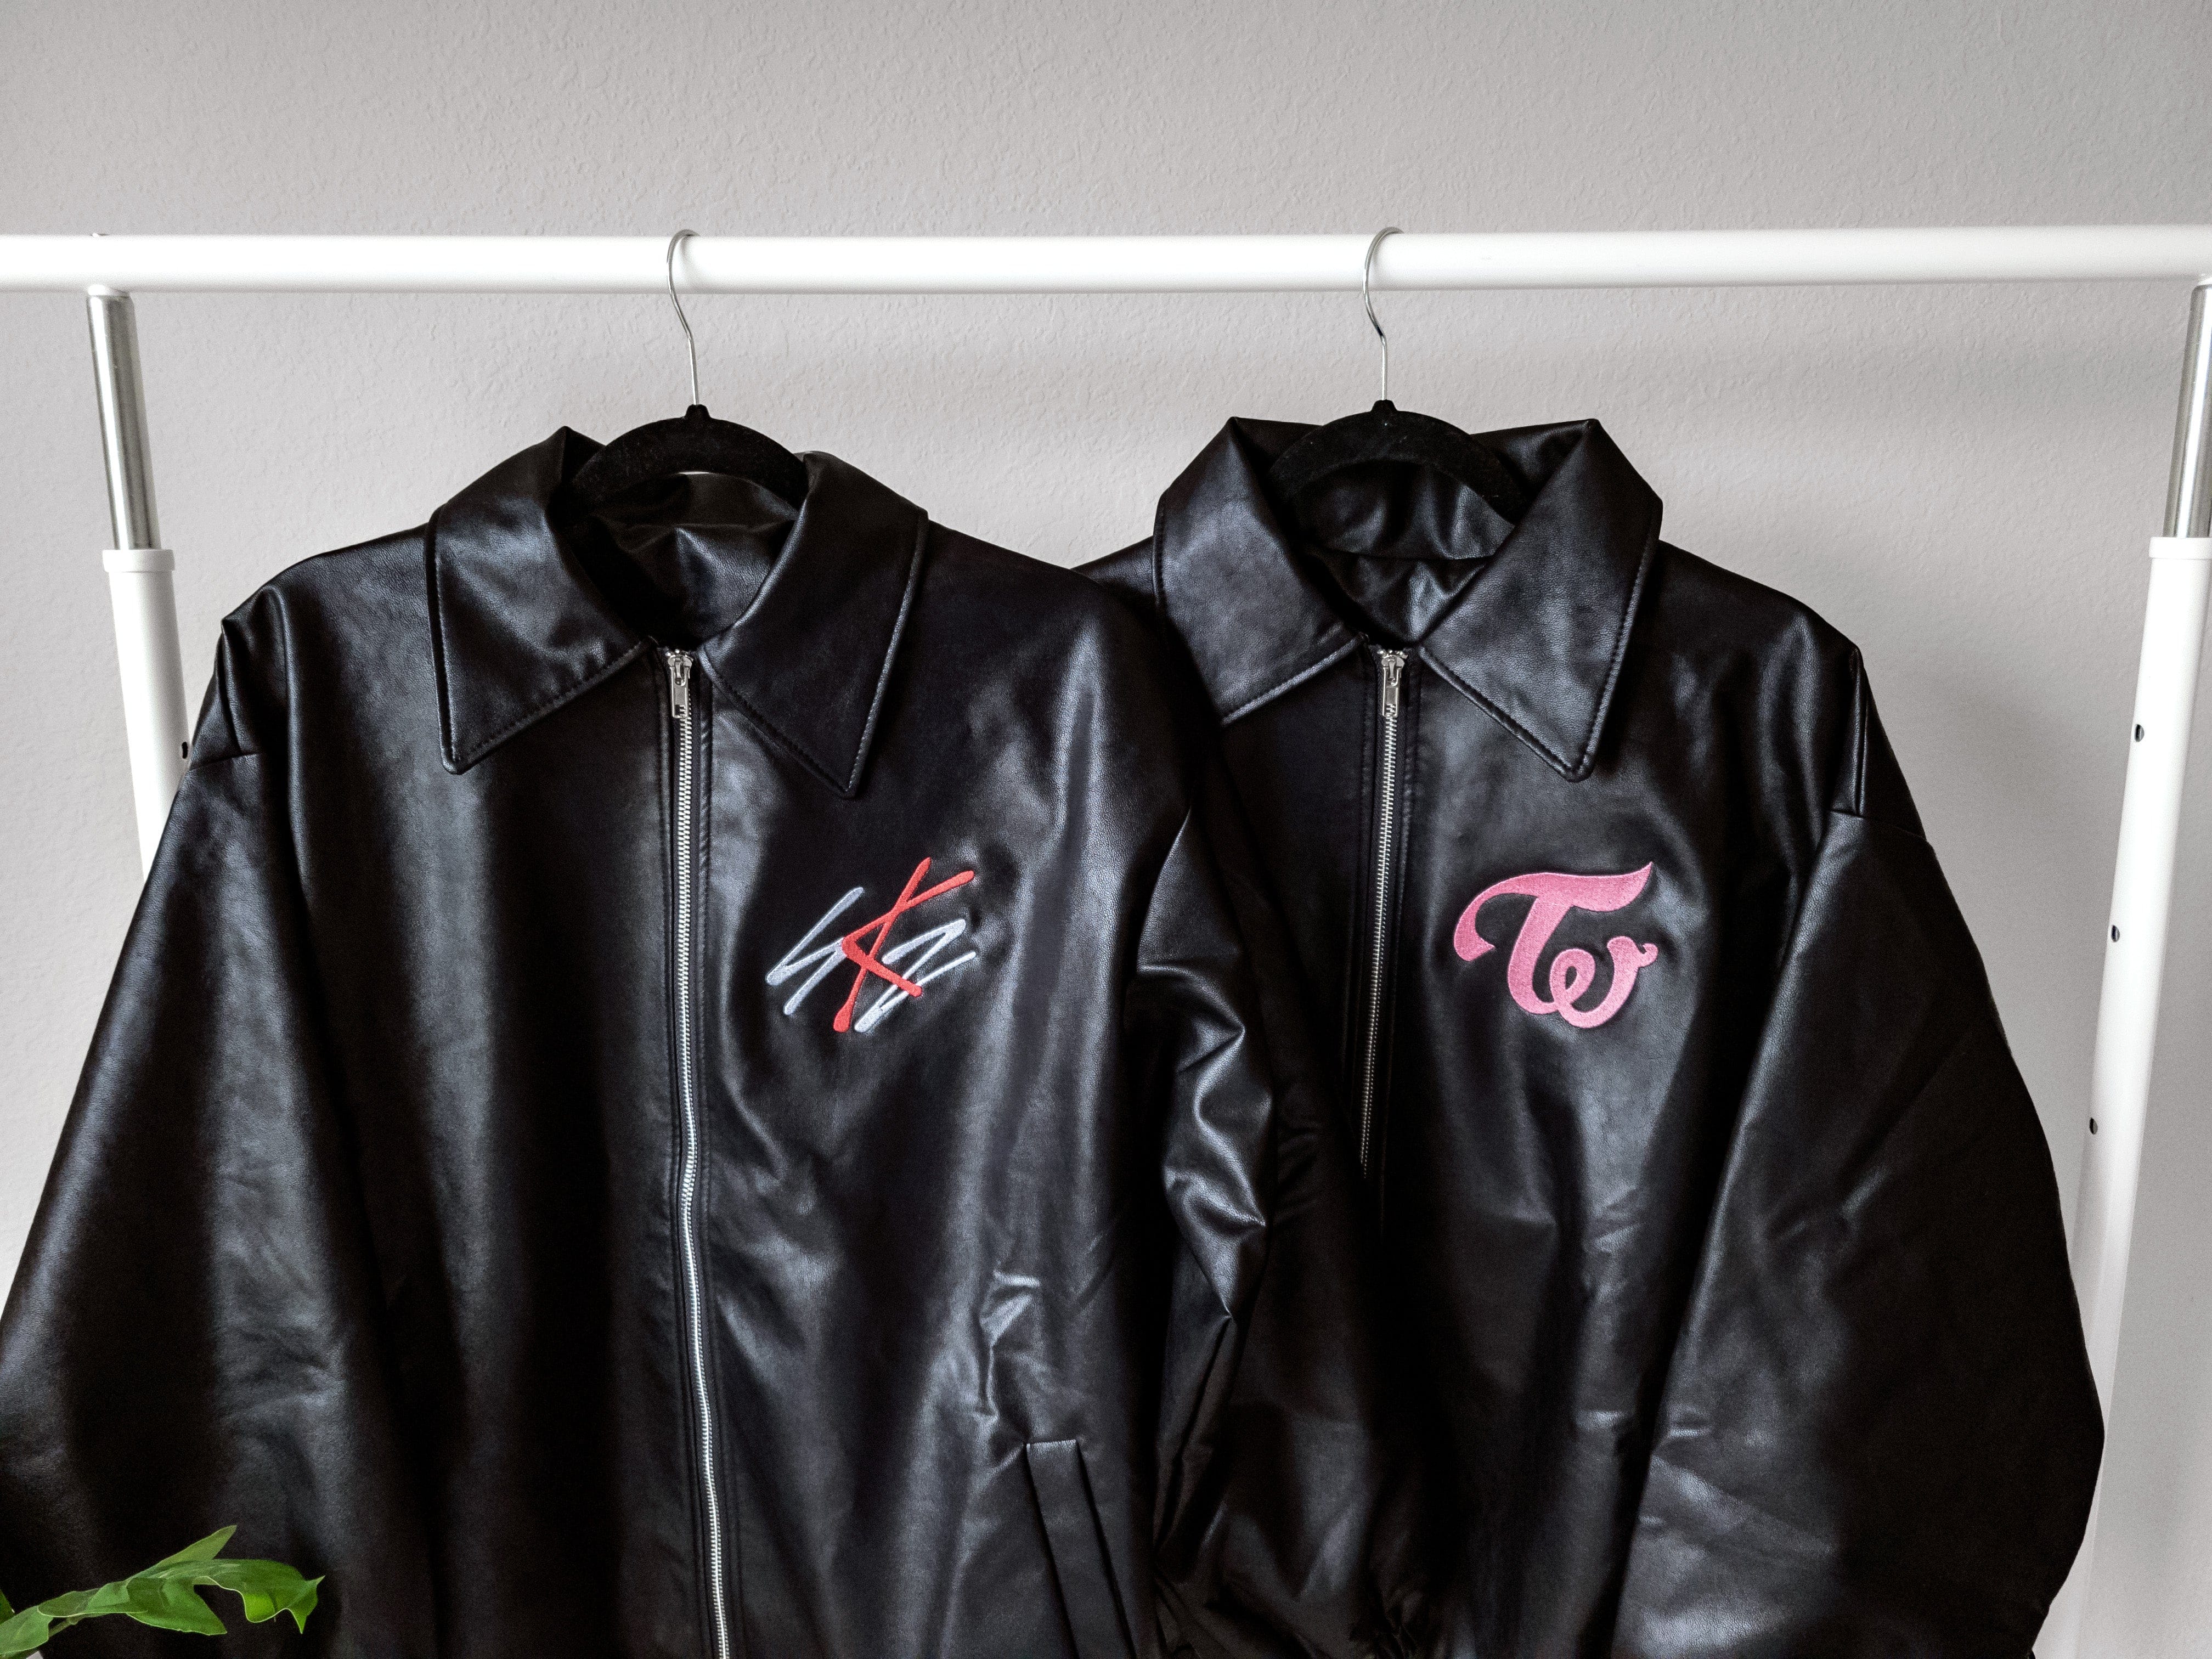 Twice Logo Faux Leather Jacket - Available for limited time!